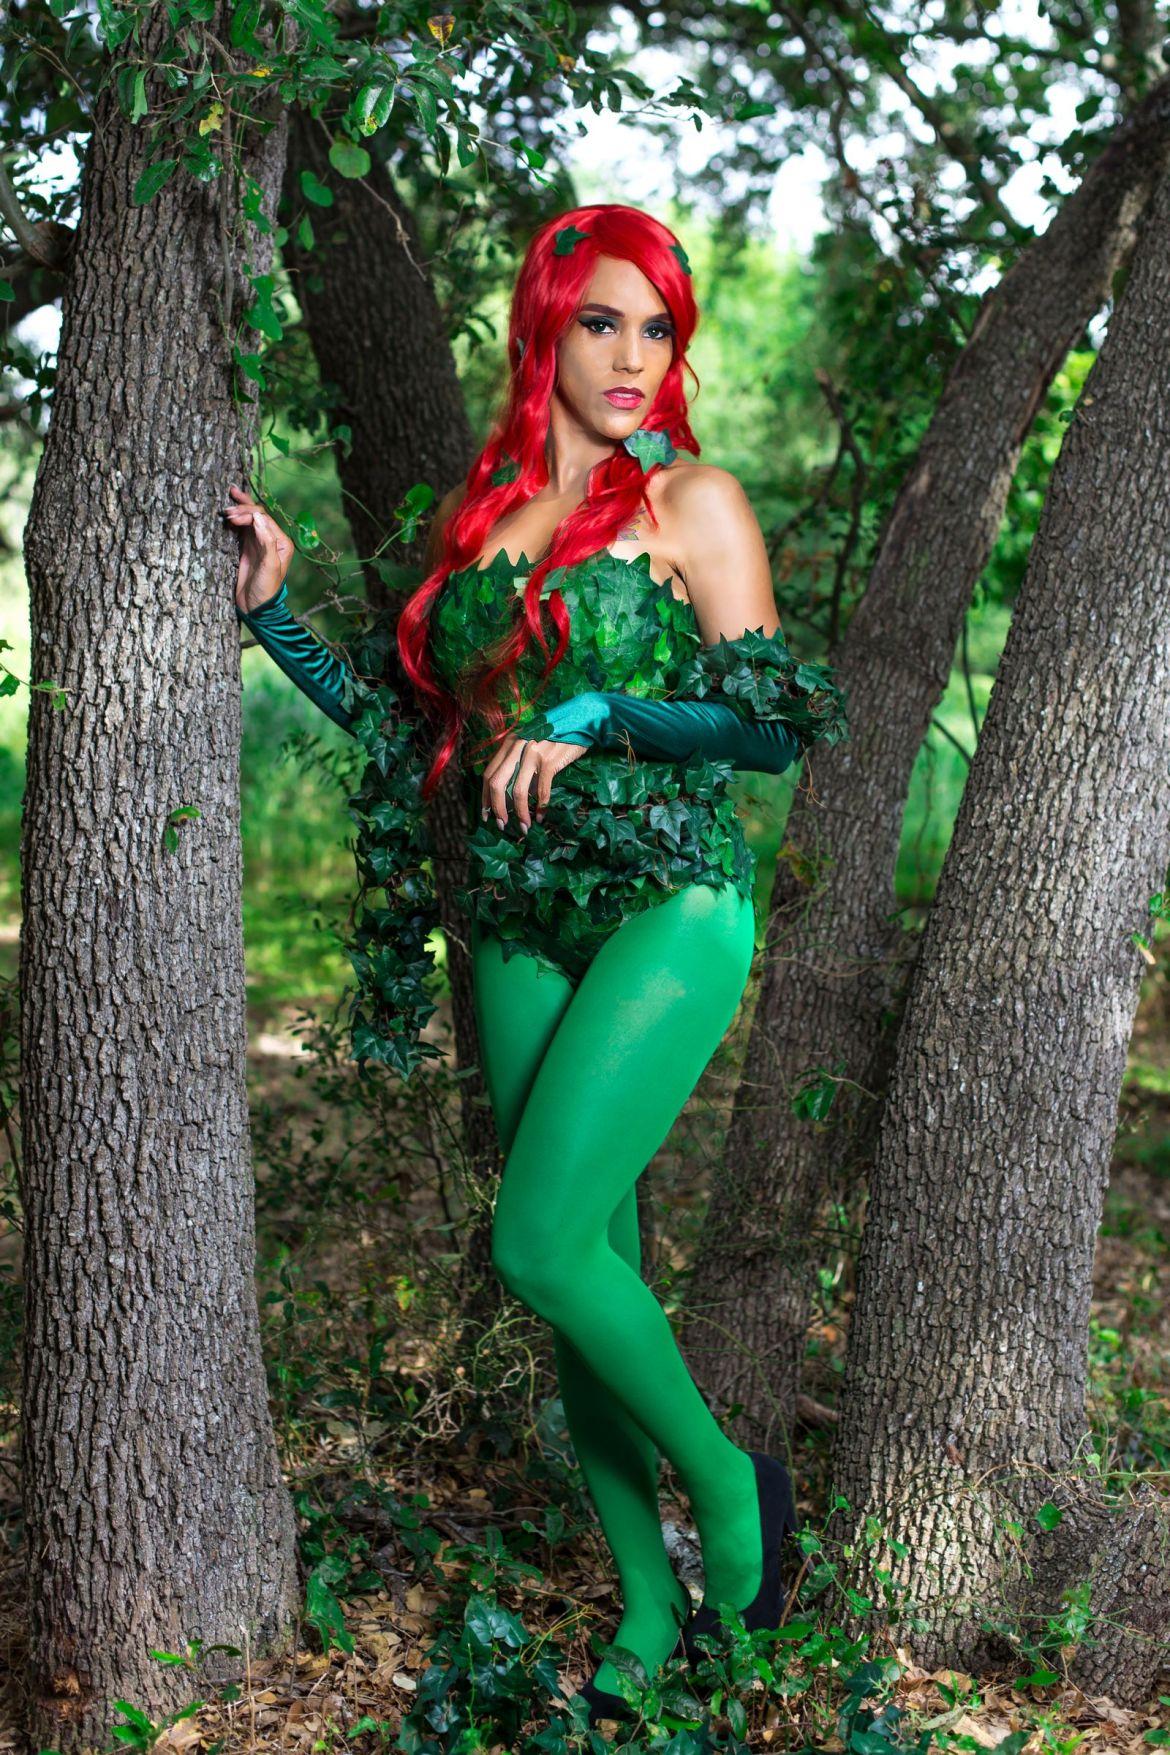 50+ Hot Pictures Of Poison Ivy – One Of The Most Beautiful Batman’s Villain 40